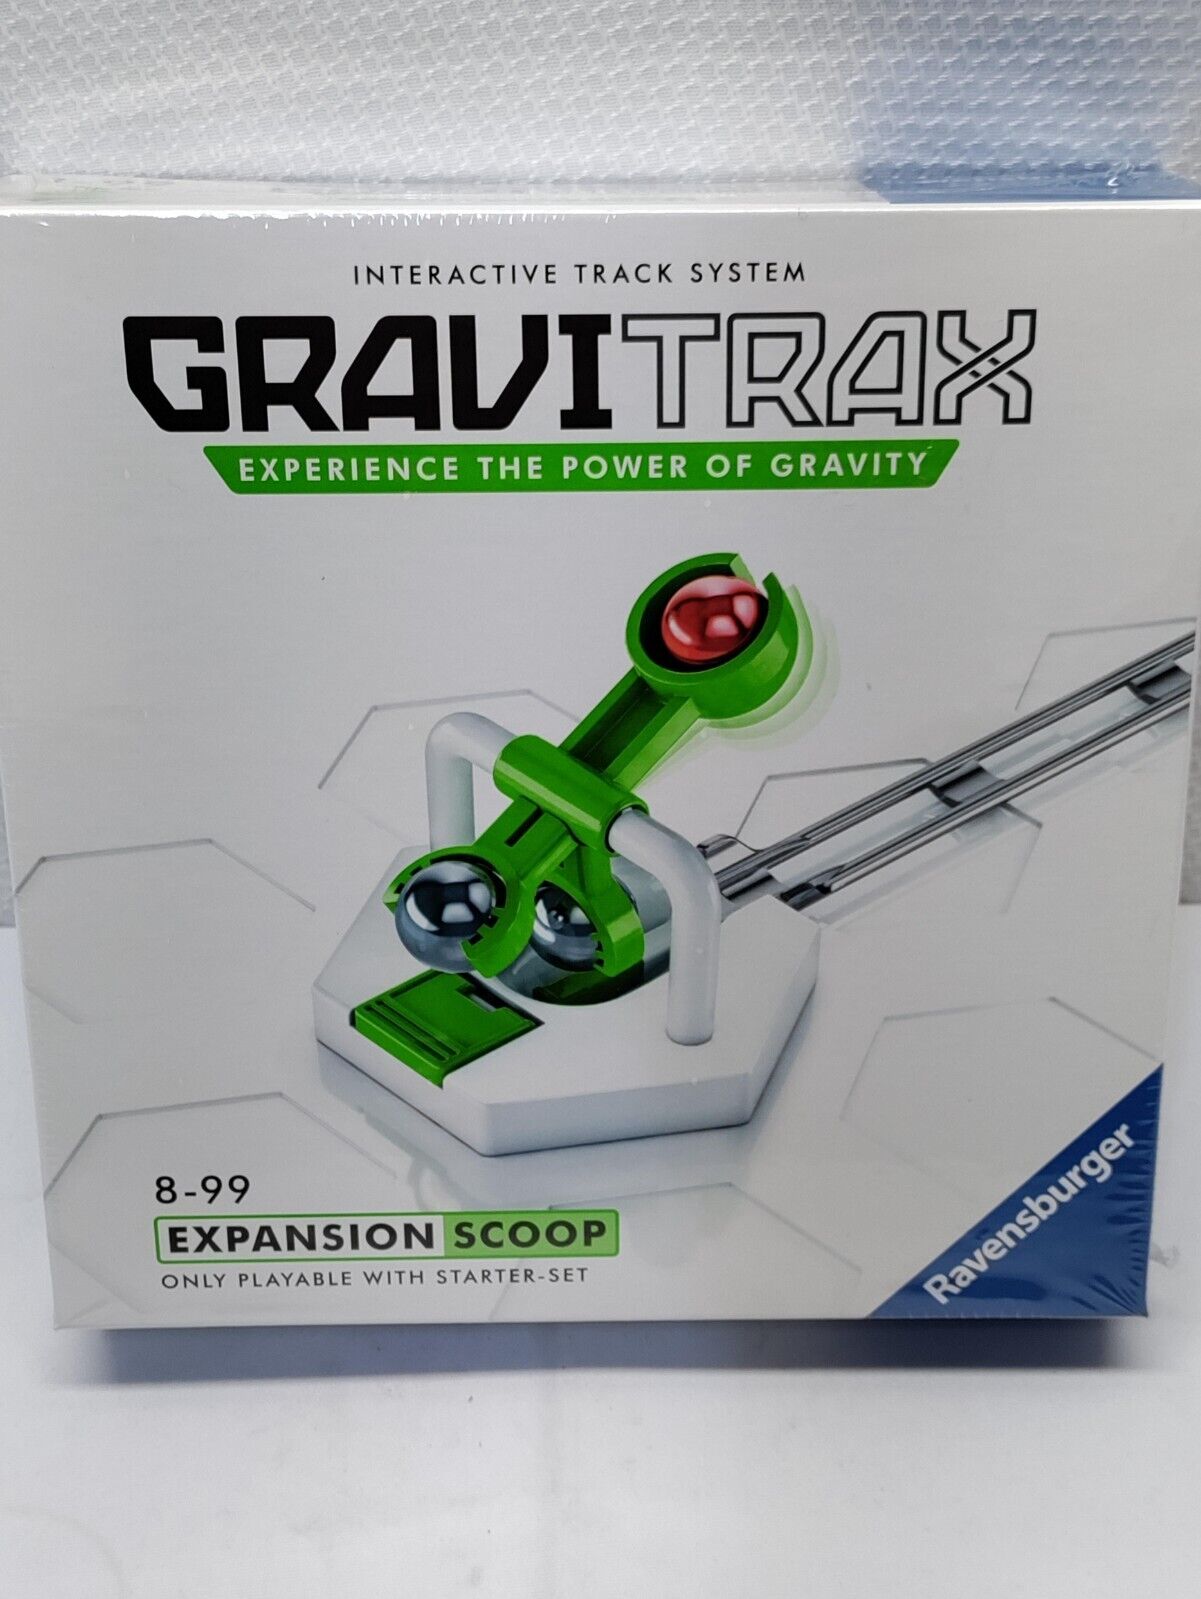 Gravitrax 8-99 Expansion Scoop by Ravensburger Only Playable With Starter Kit